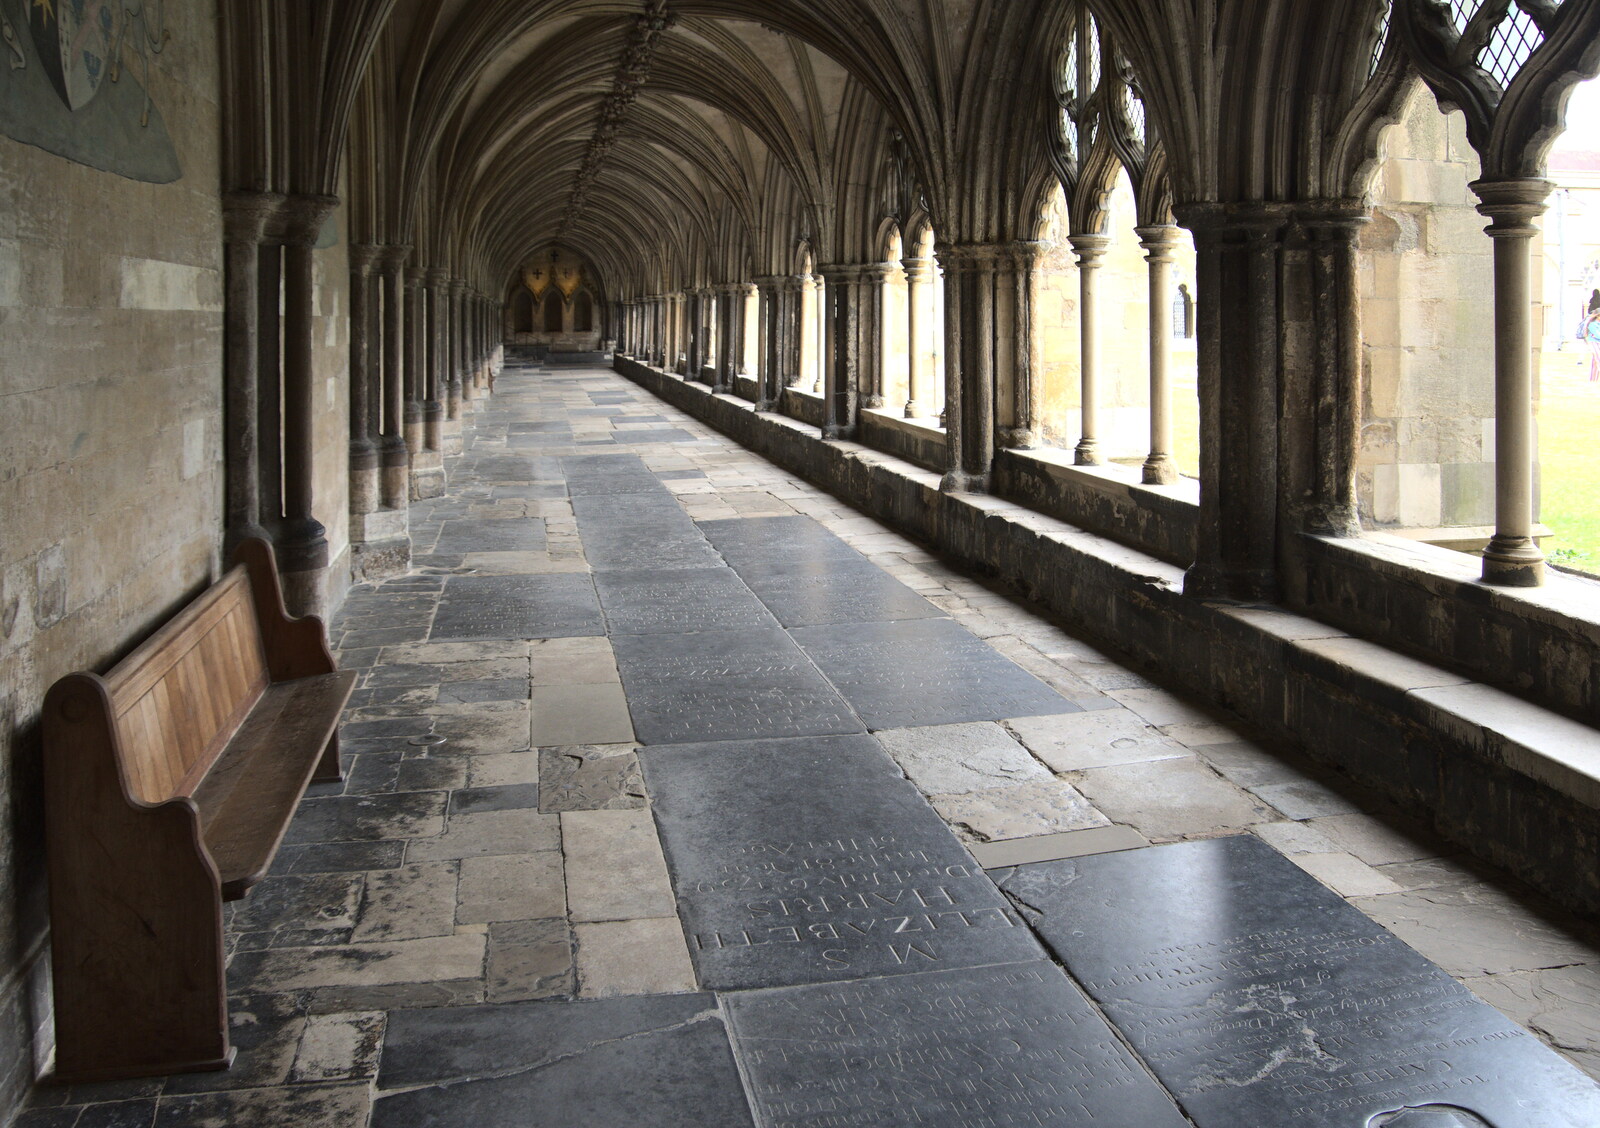 Outside in the Cloisters from Discovering the Hidden City: Norwich, Norfolk - 23rd May 2022